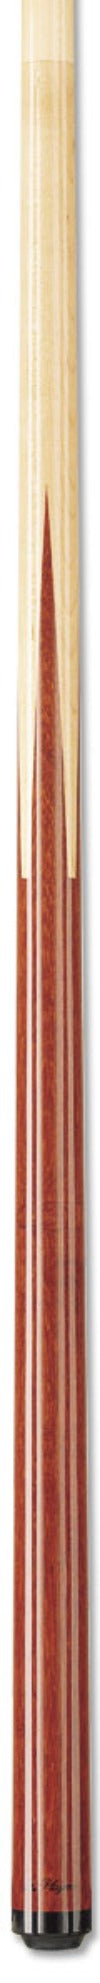 Players Players S-PSPC Pool Cue Pool Cue